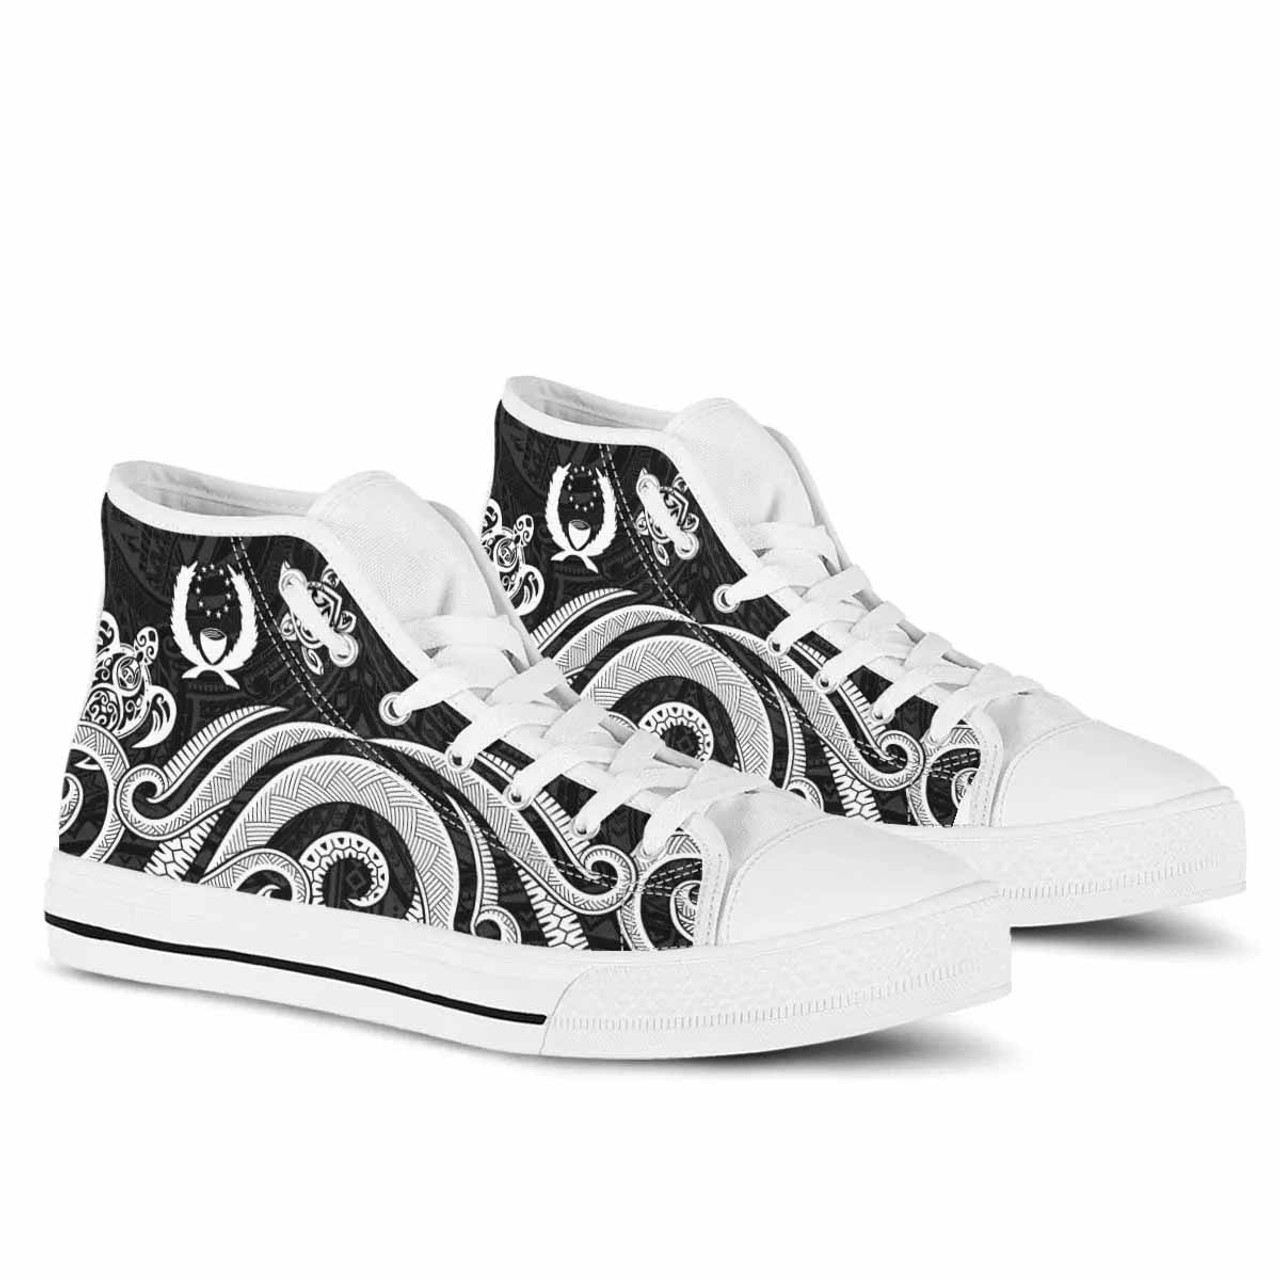 Pohnpei High Top Shoes - White Tentacle Turtle 7